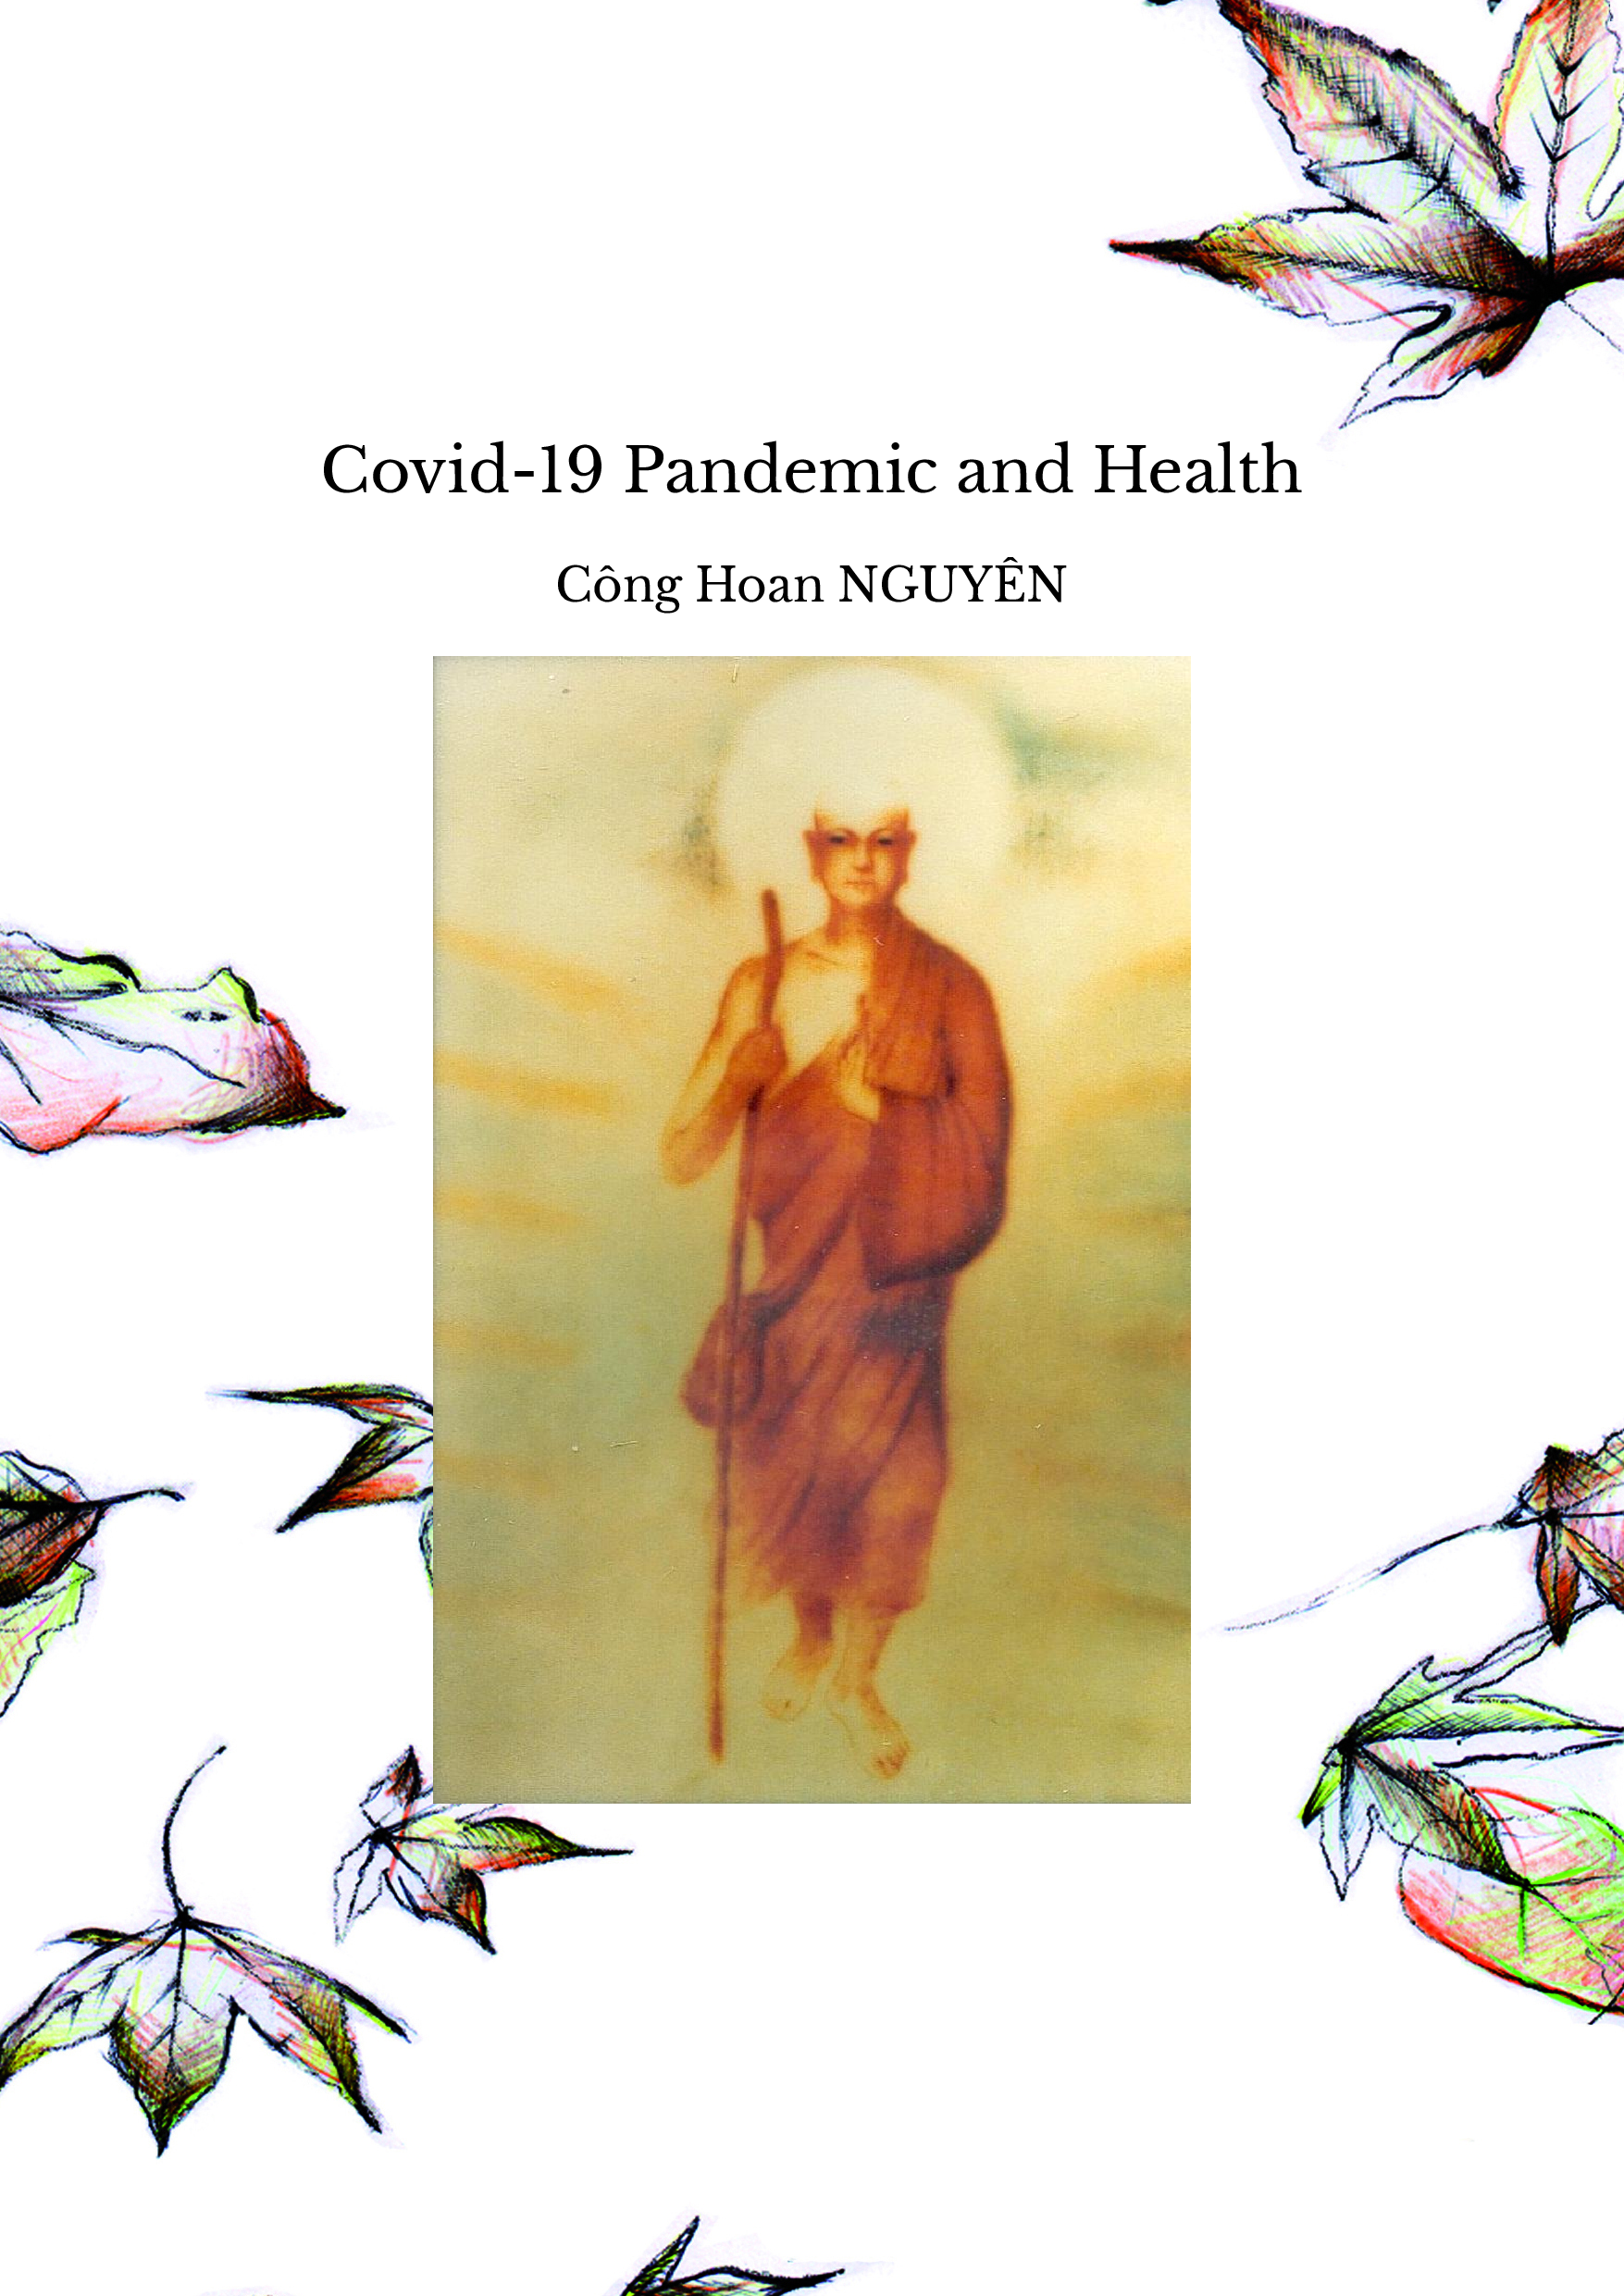 Covid-19 Pandemic and Health